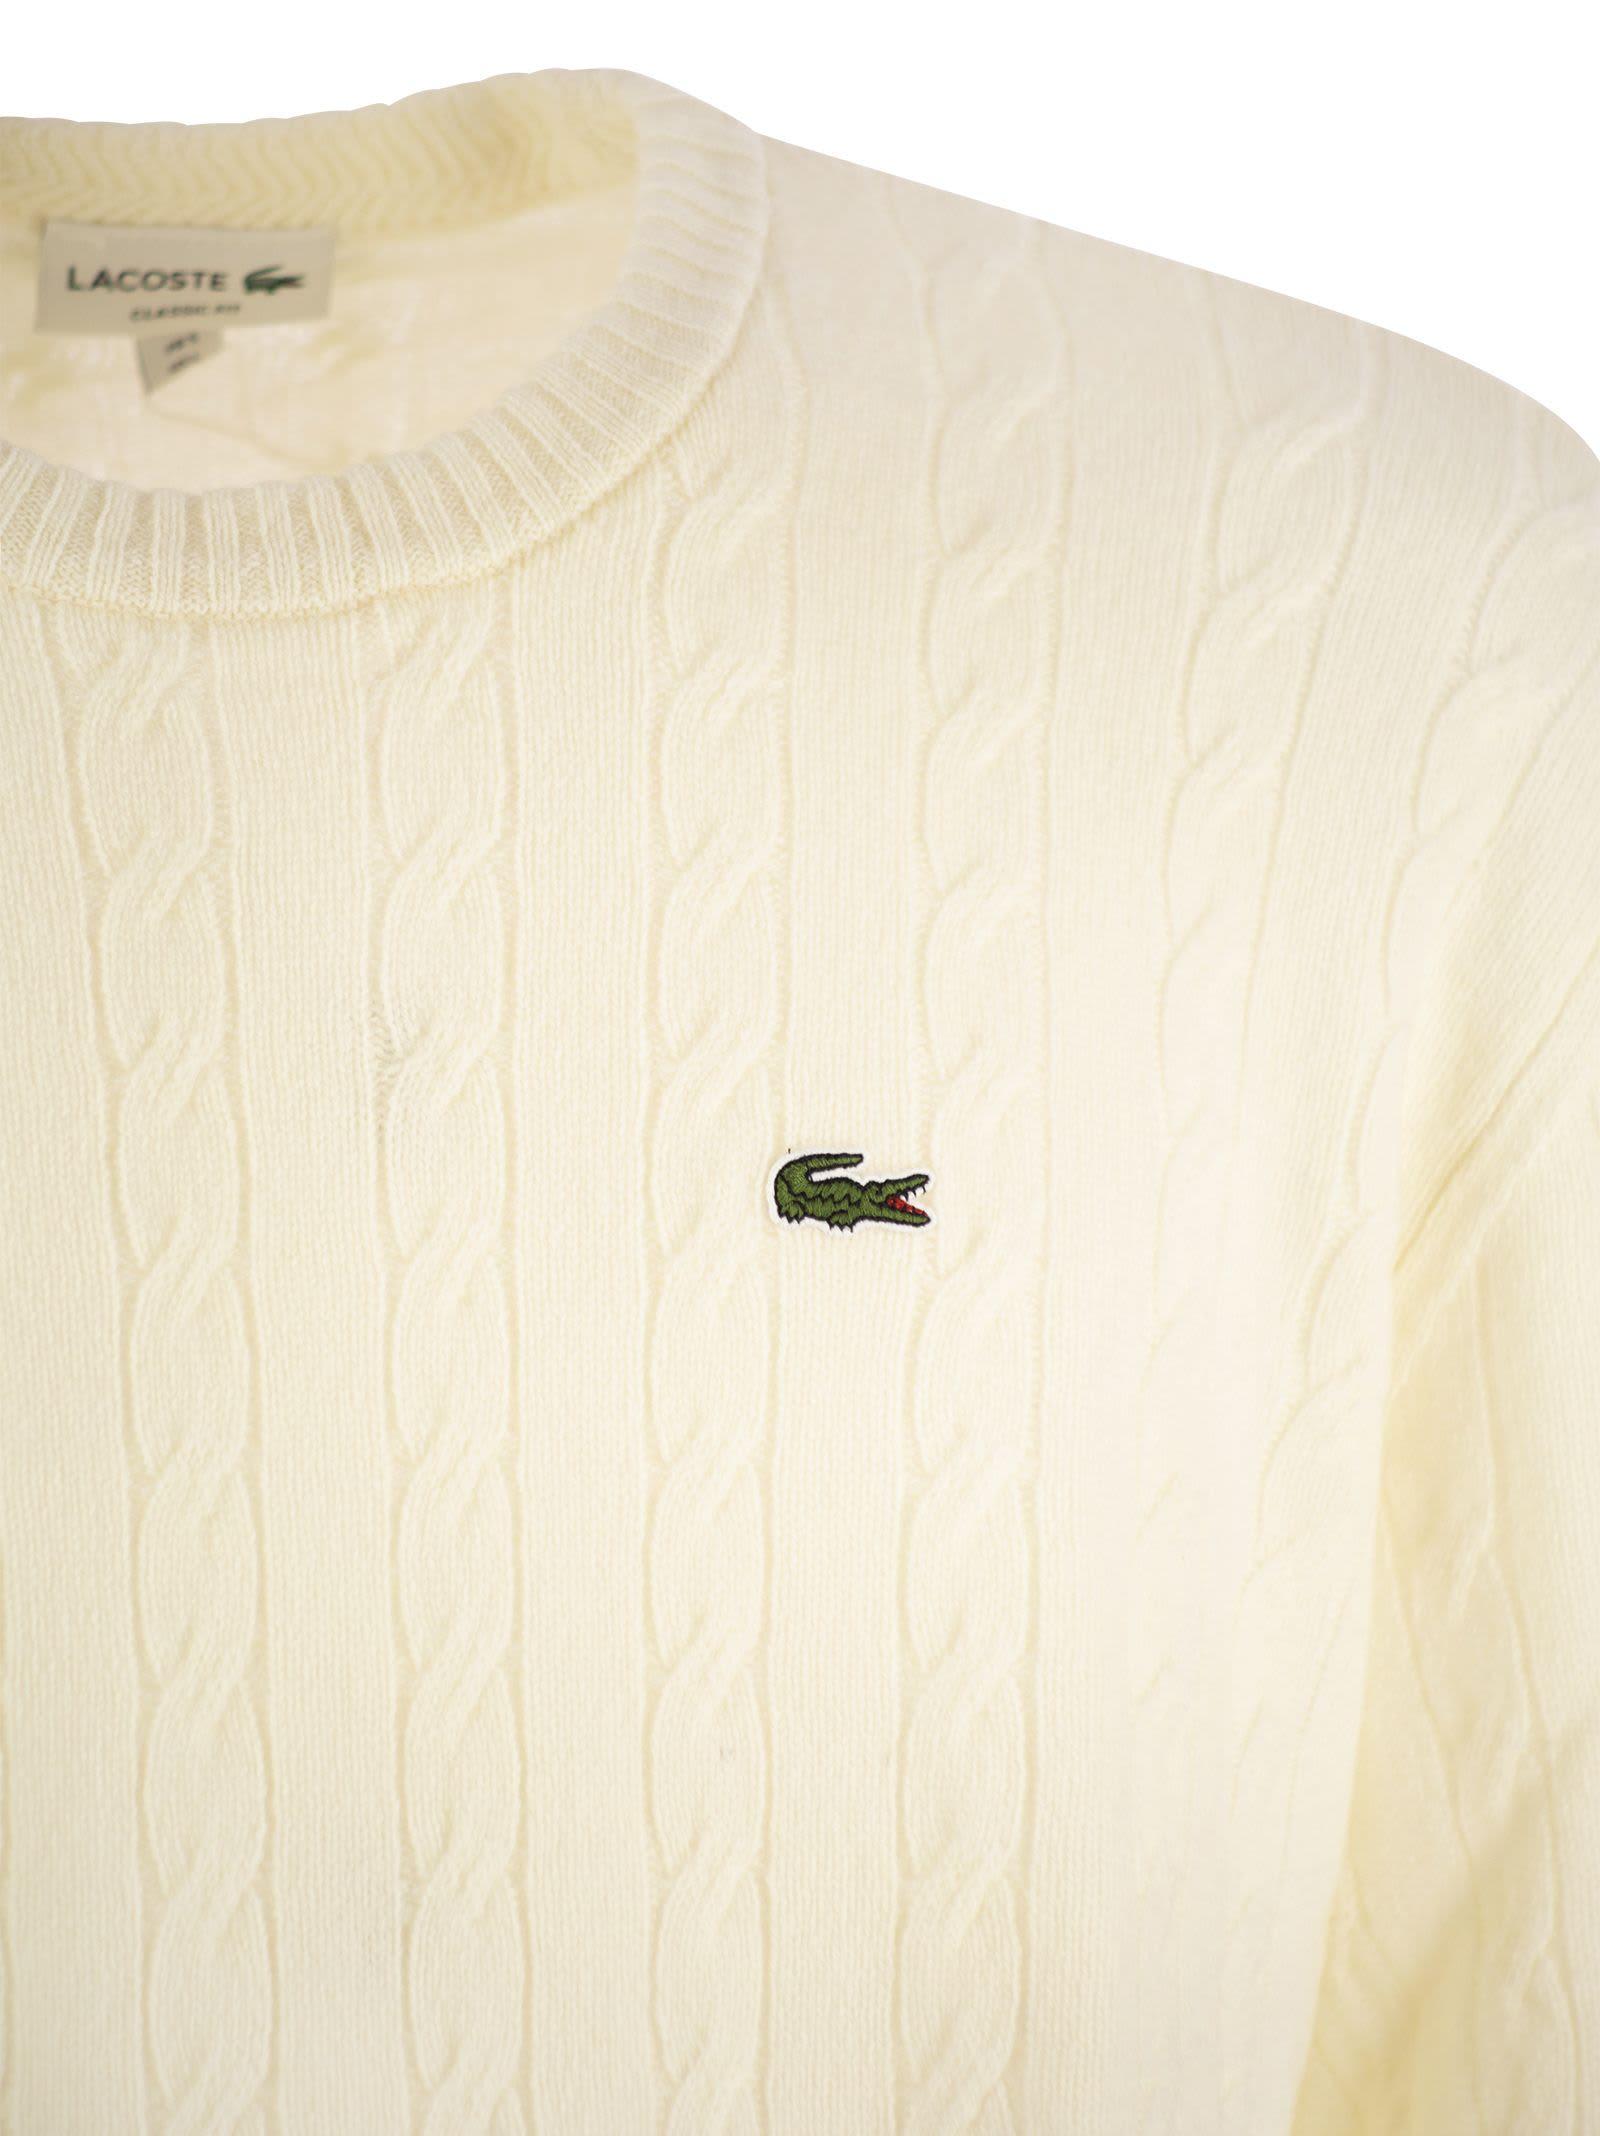 Lacoste Plaited Wool Crew-neck Sweater in Natural for Men | Lyst